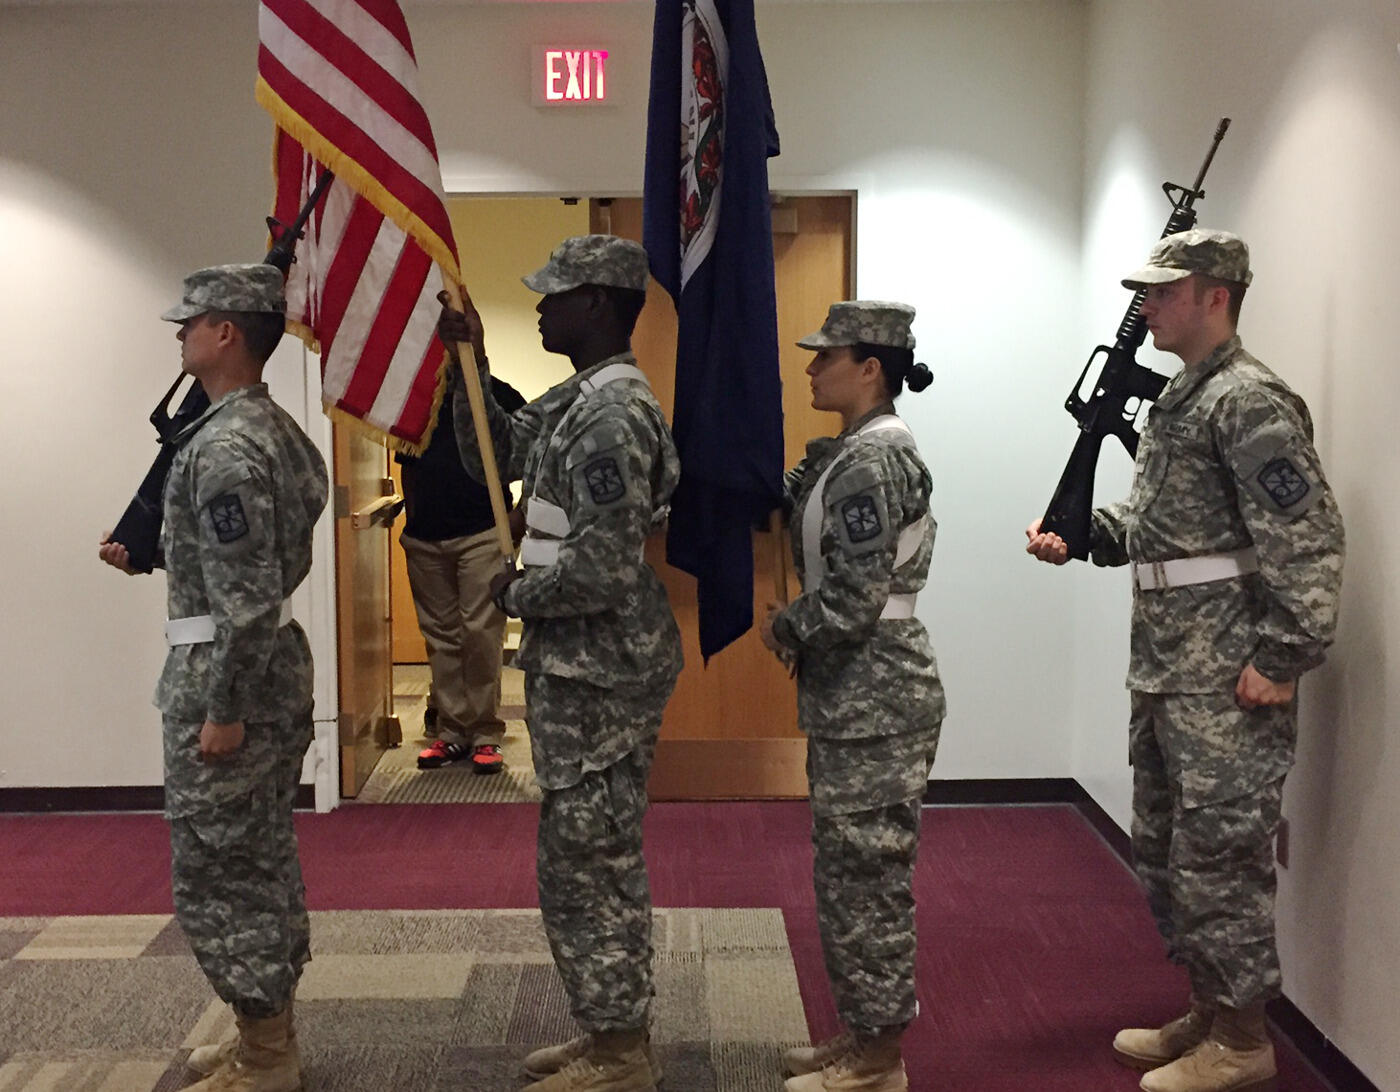 VCU’s graduating student veterans were honored at a special graduation ceremony, which began with a posting of colors by the VCU ROTC. 